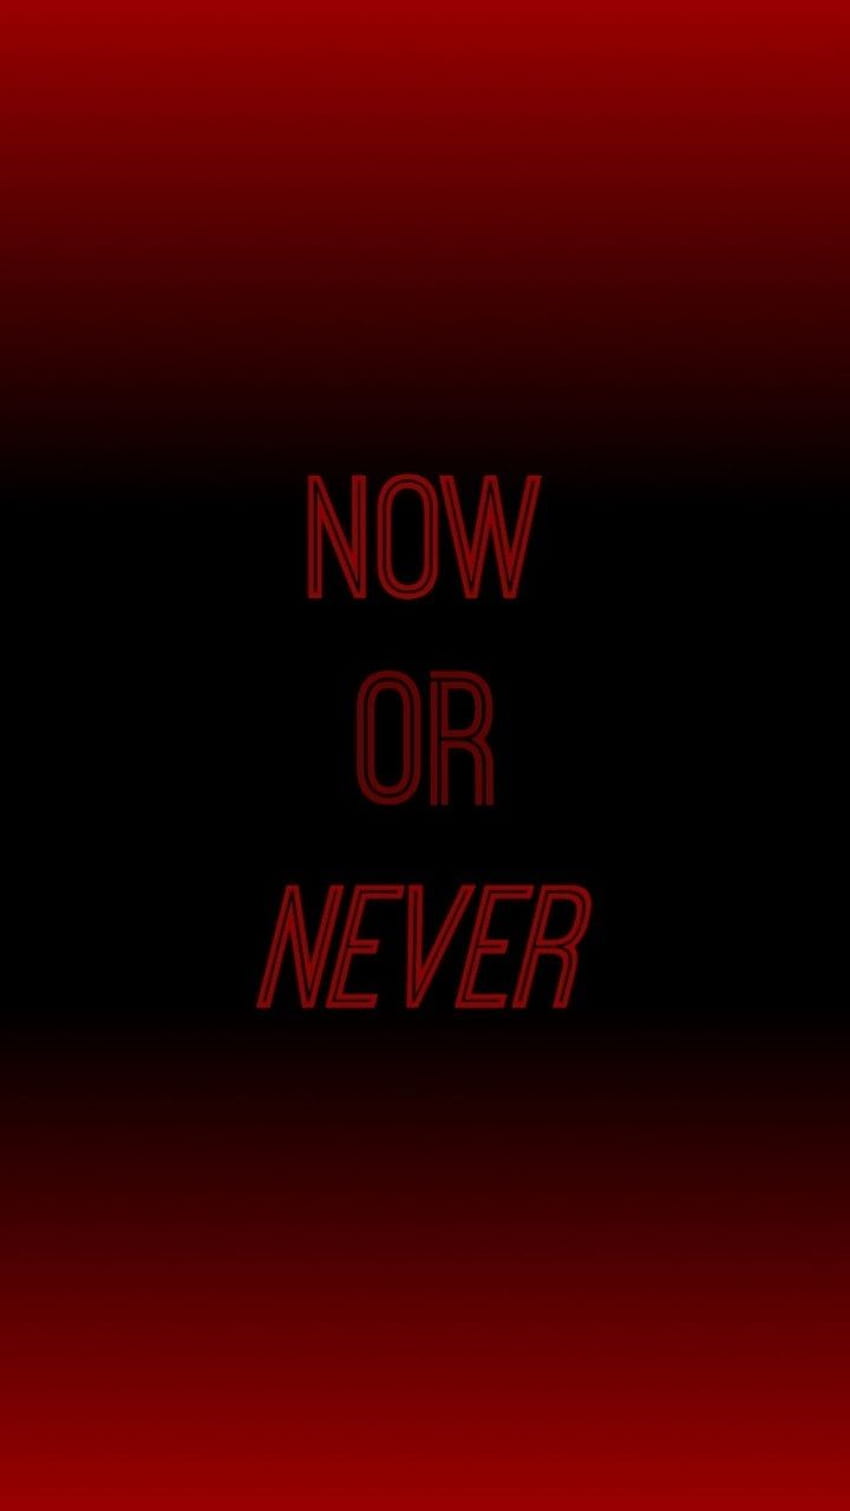 Now or never HD phone wallpaper